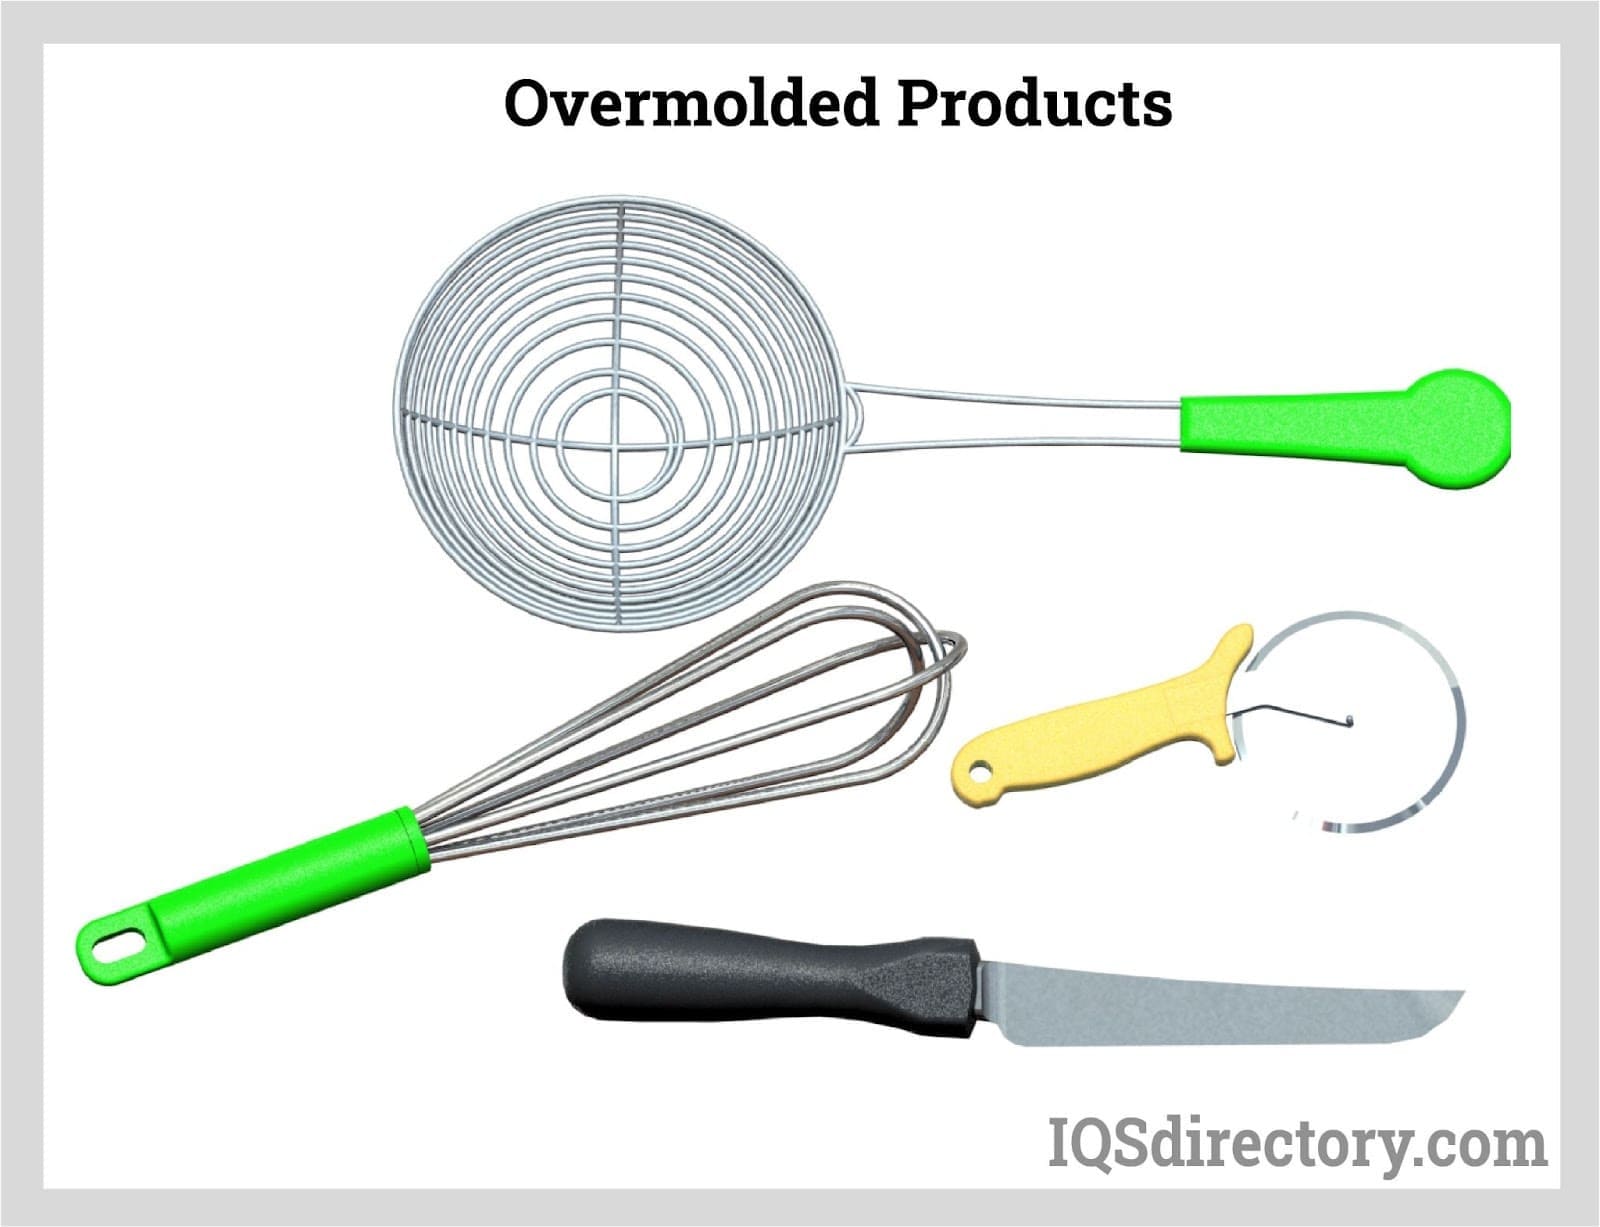 Overmolded Products